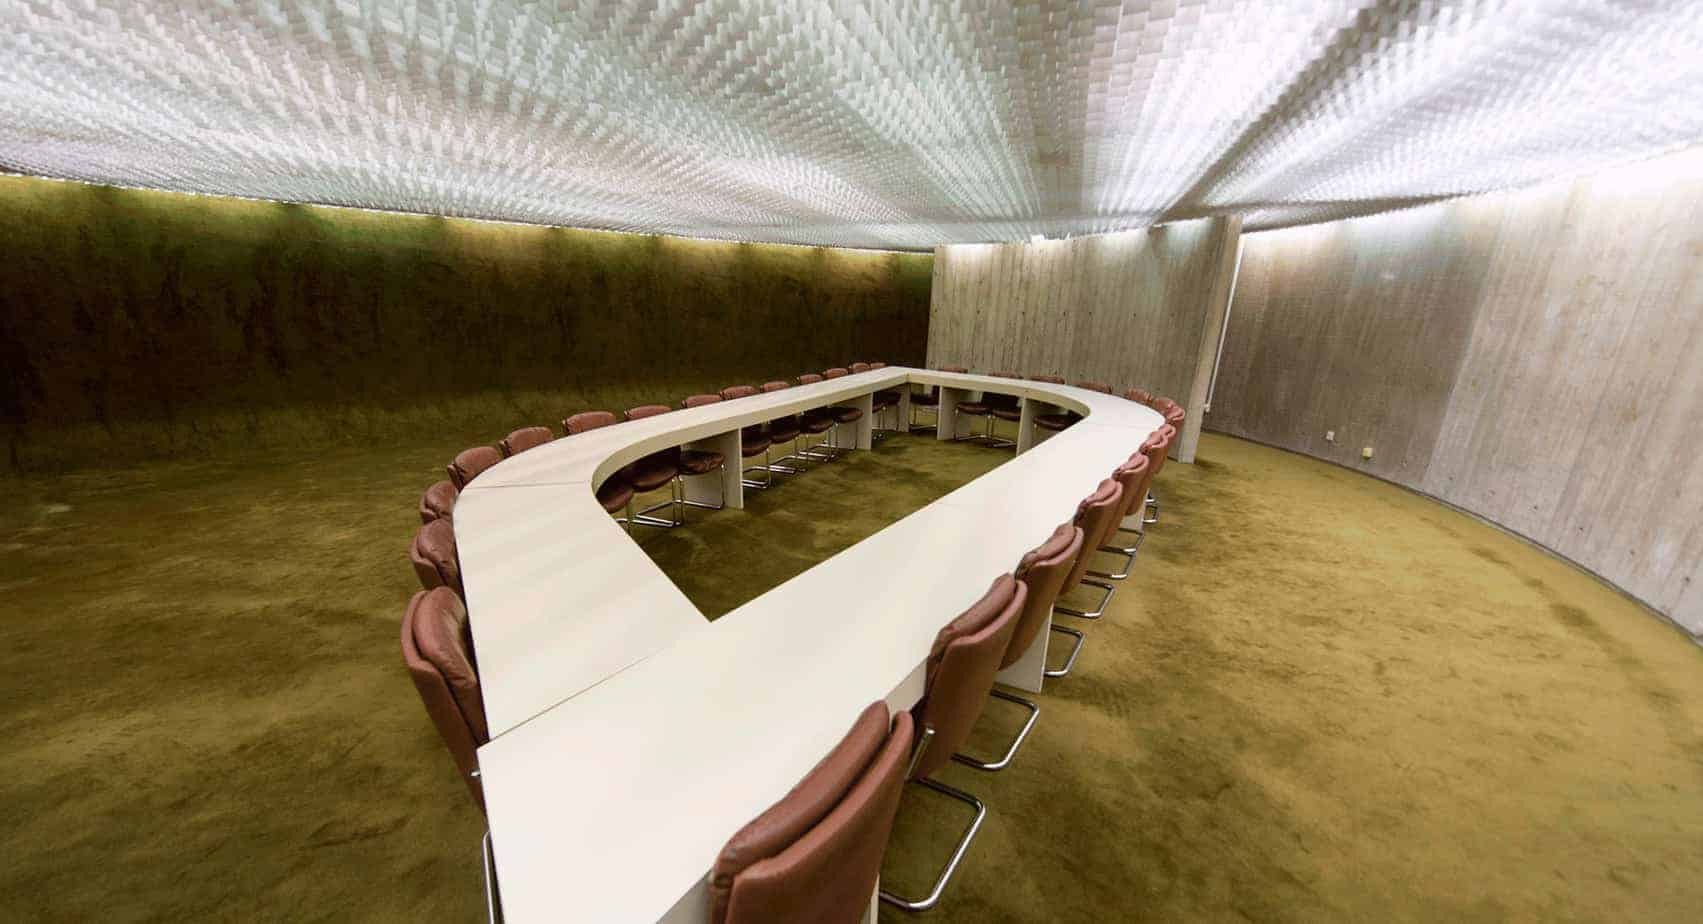 Futuristic Meeting Room. Hire this space for all sorts of business gatherings